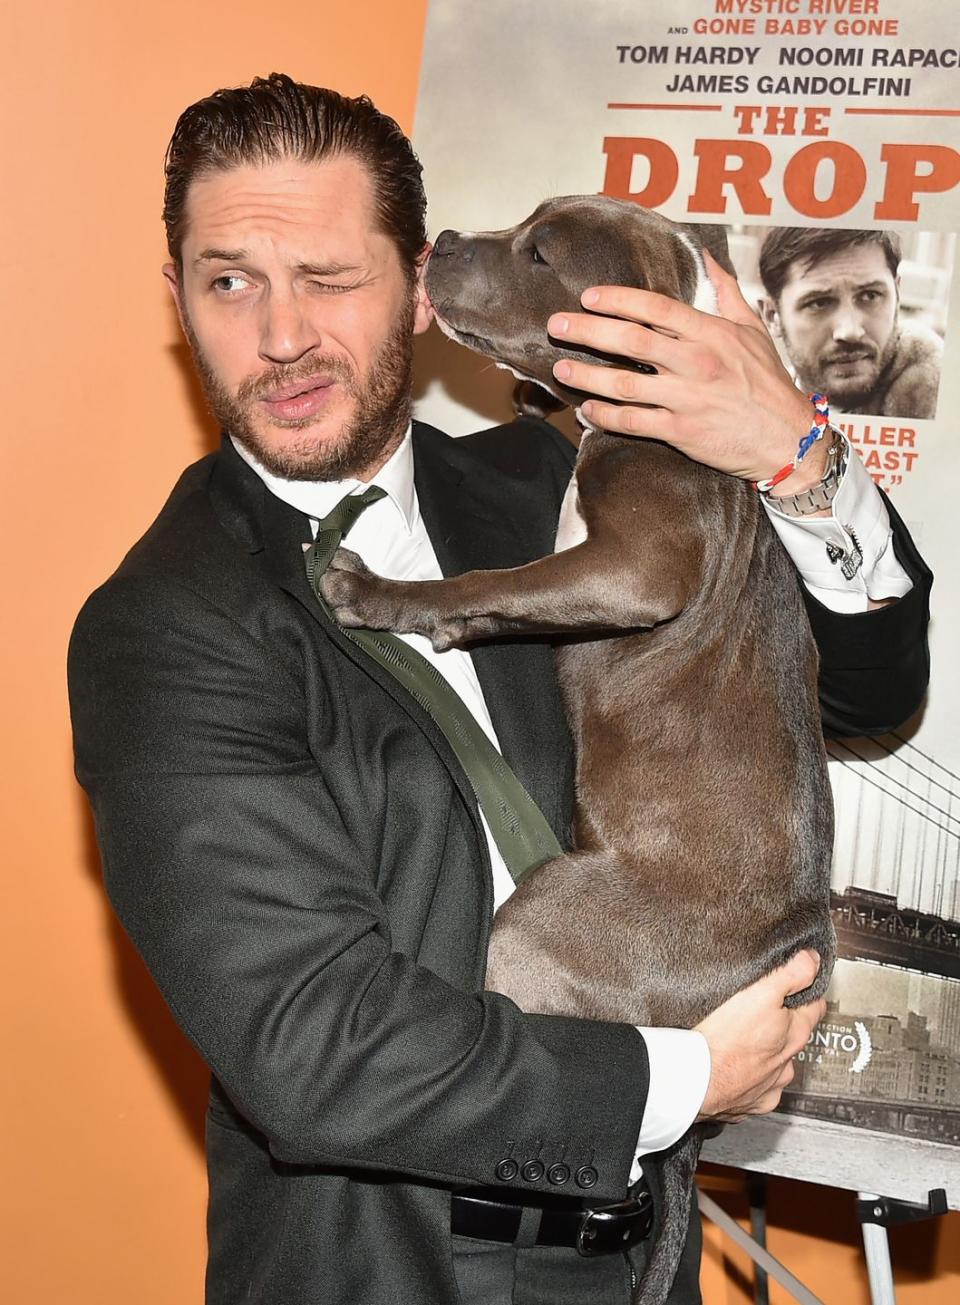 <p>Tom Hardy is a major dog lover and was left devastated when his canine Woody (who accompanied him to the Legend premiere in 2015) passed away a few years ago. </p><p>Here's Hardy with Rocco, who starred in his film The Drop in 2014.</p>